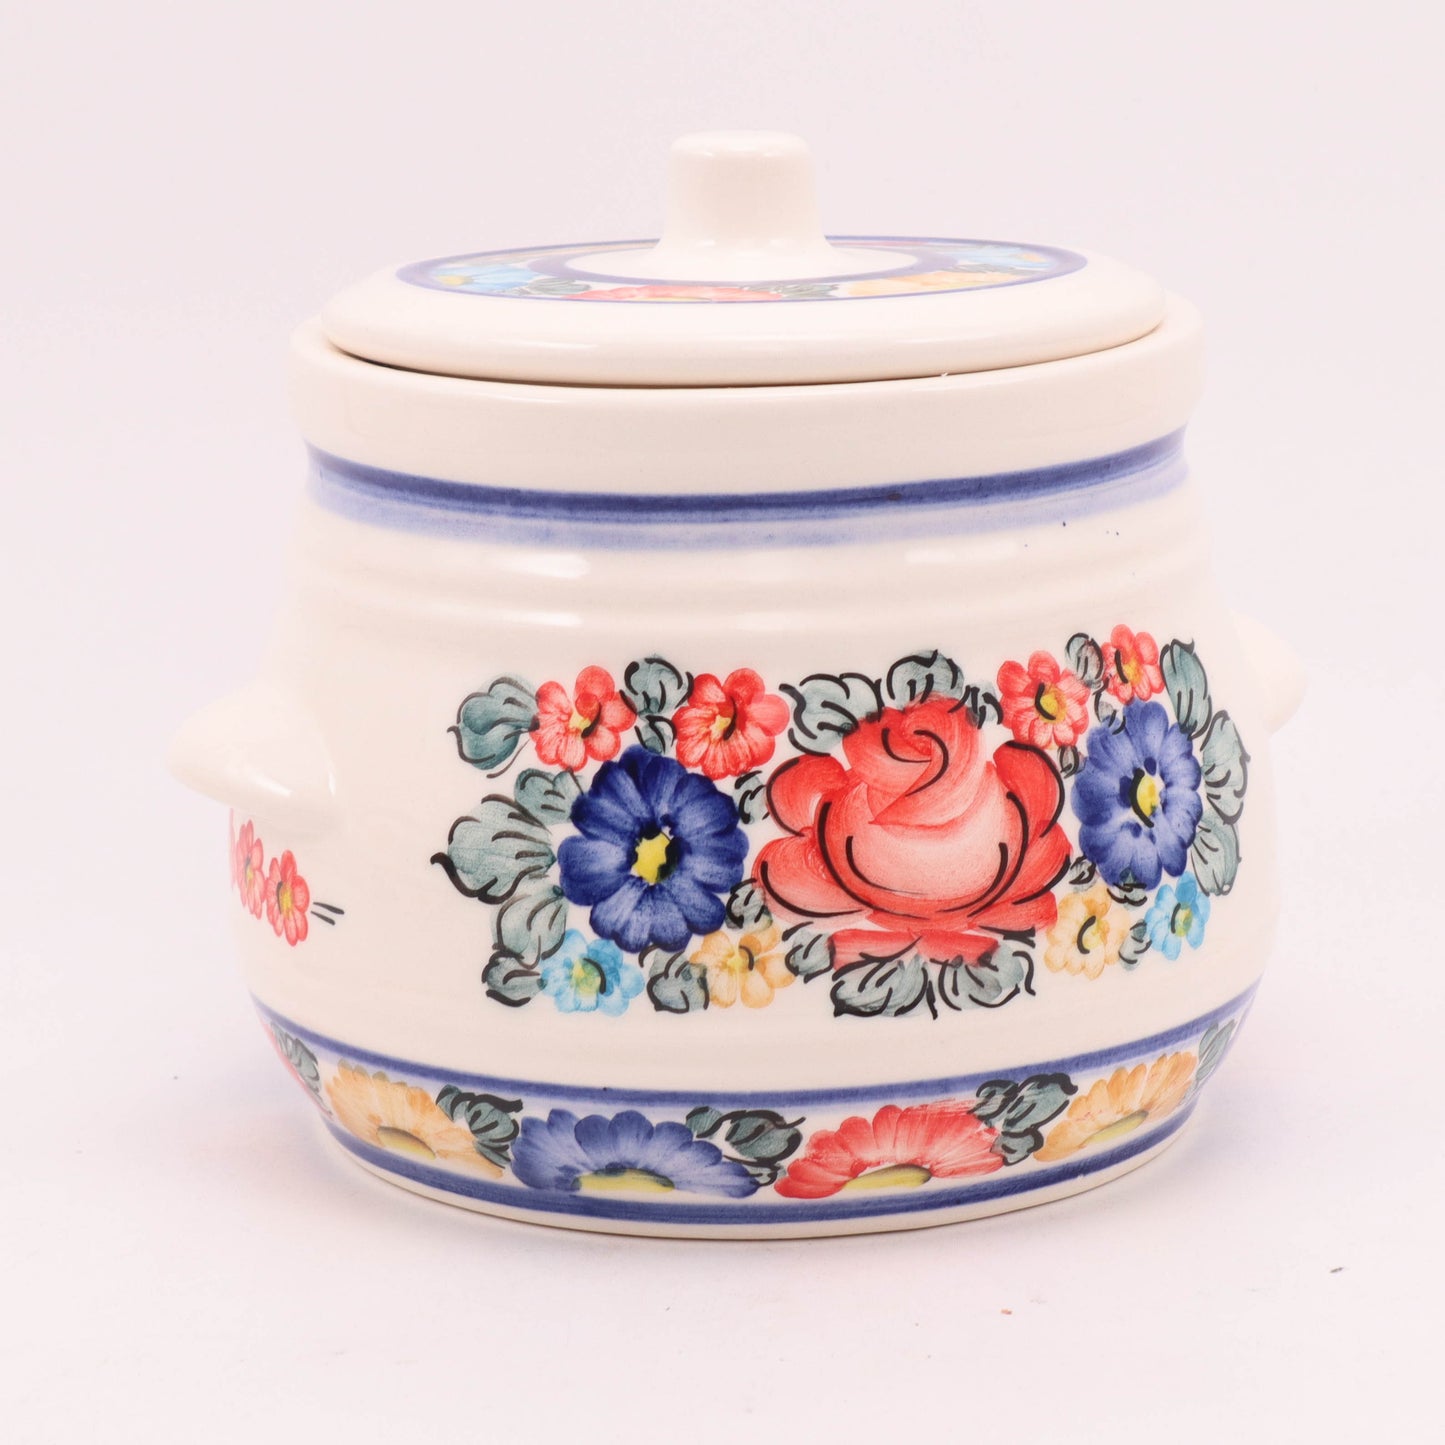 6"x5.5" Round Container with Lid. Pattern: Colorful